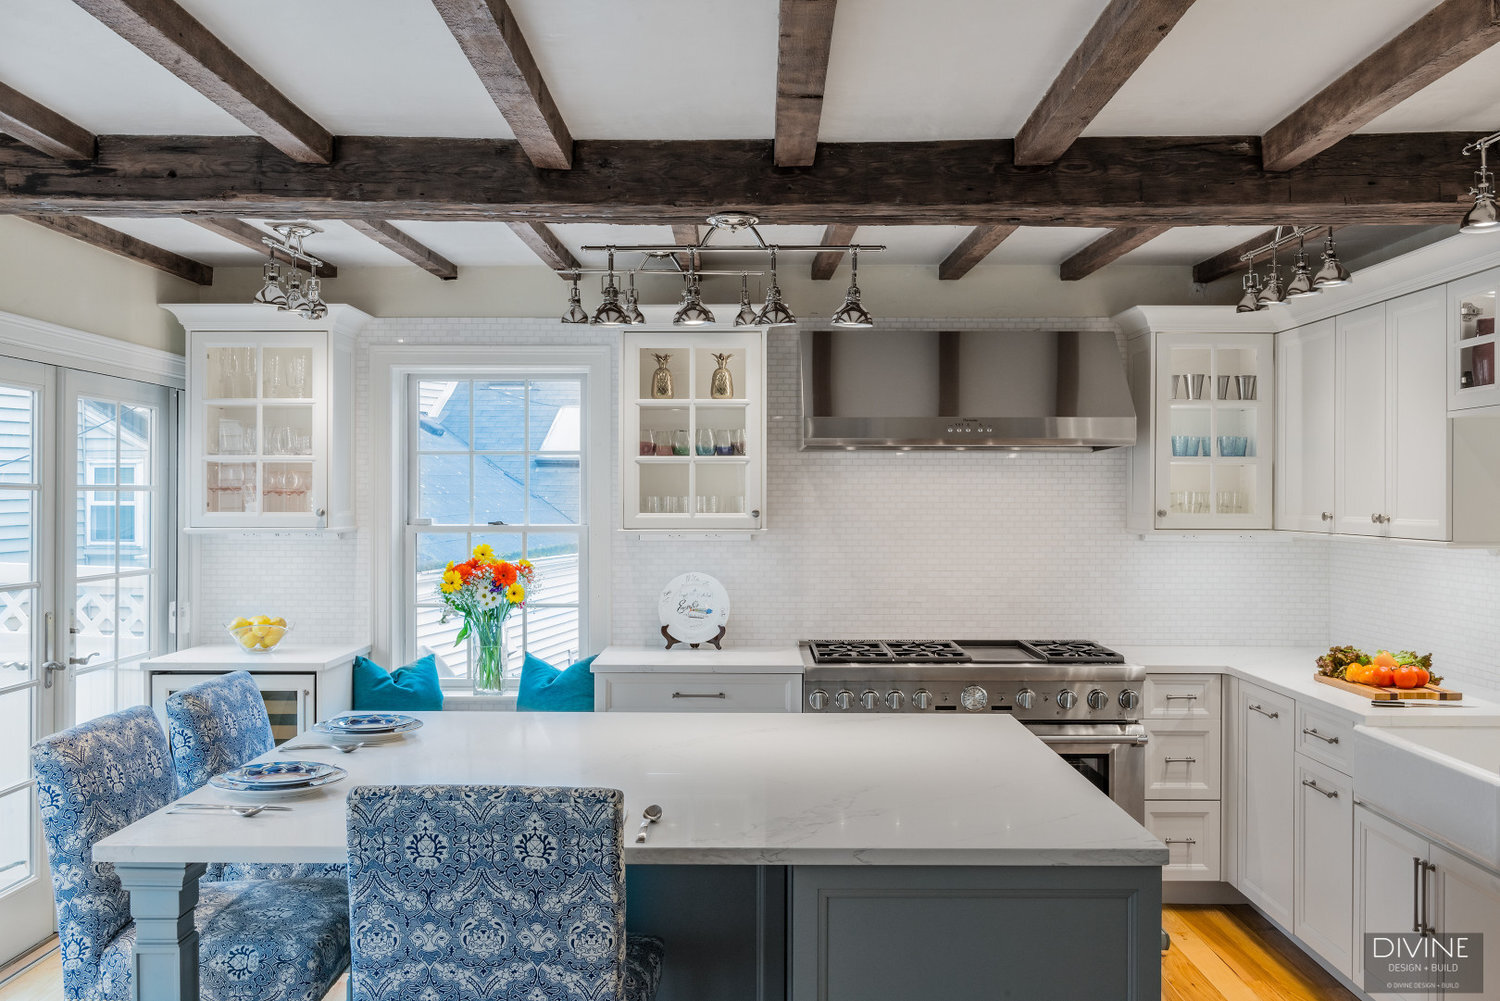 white, shaker style cabinets with brushed nickel accessories, white mosaic subway tile backsplash, cambria countertops with light marbling in grey tone and thermador appliances. Exposed beams